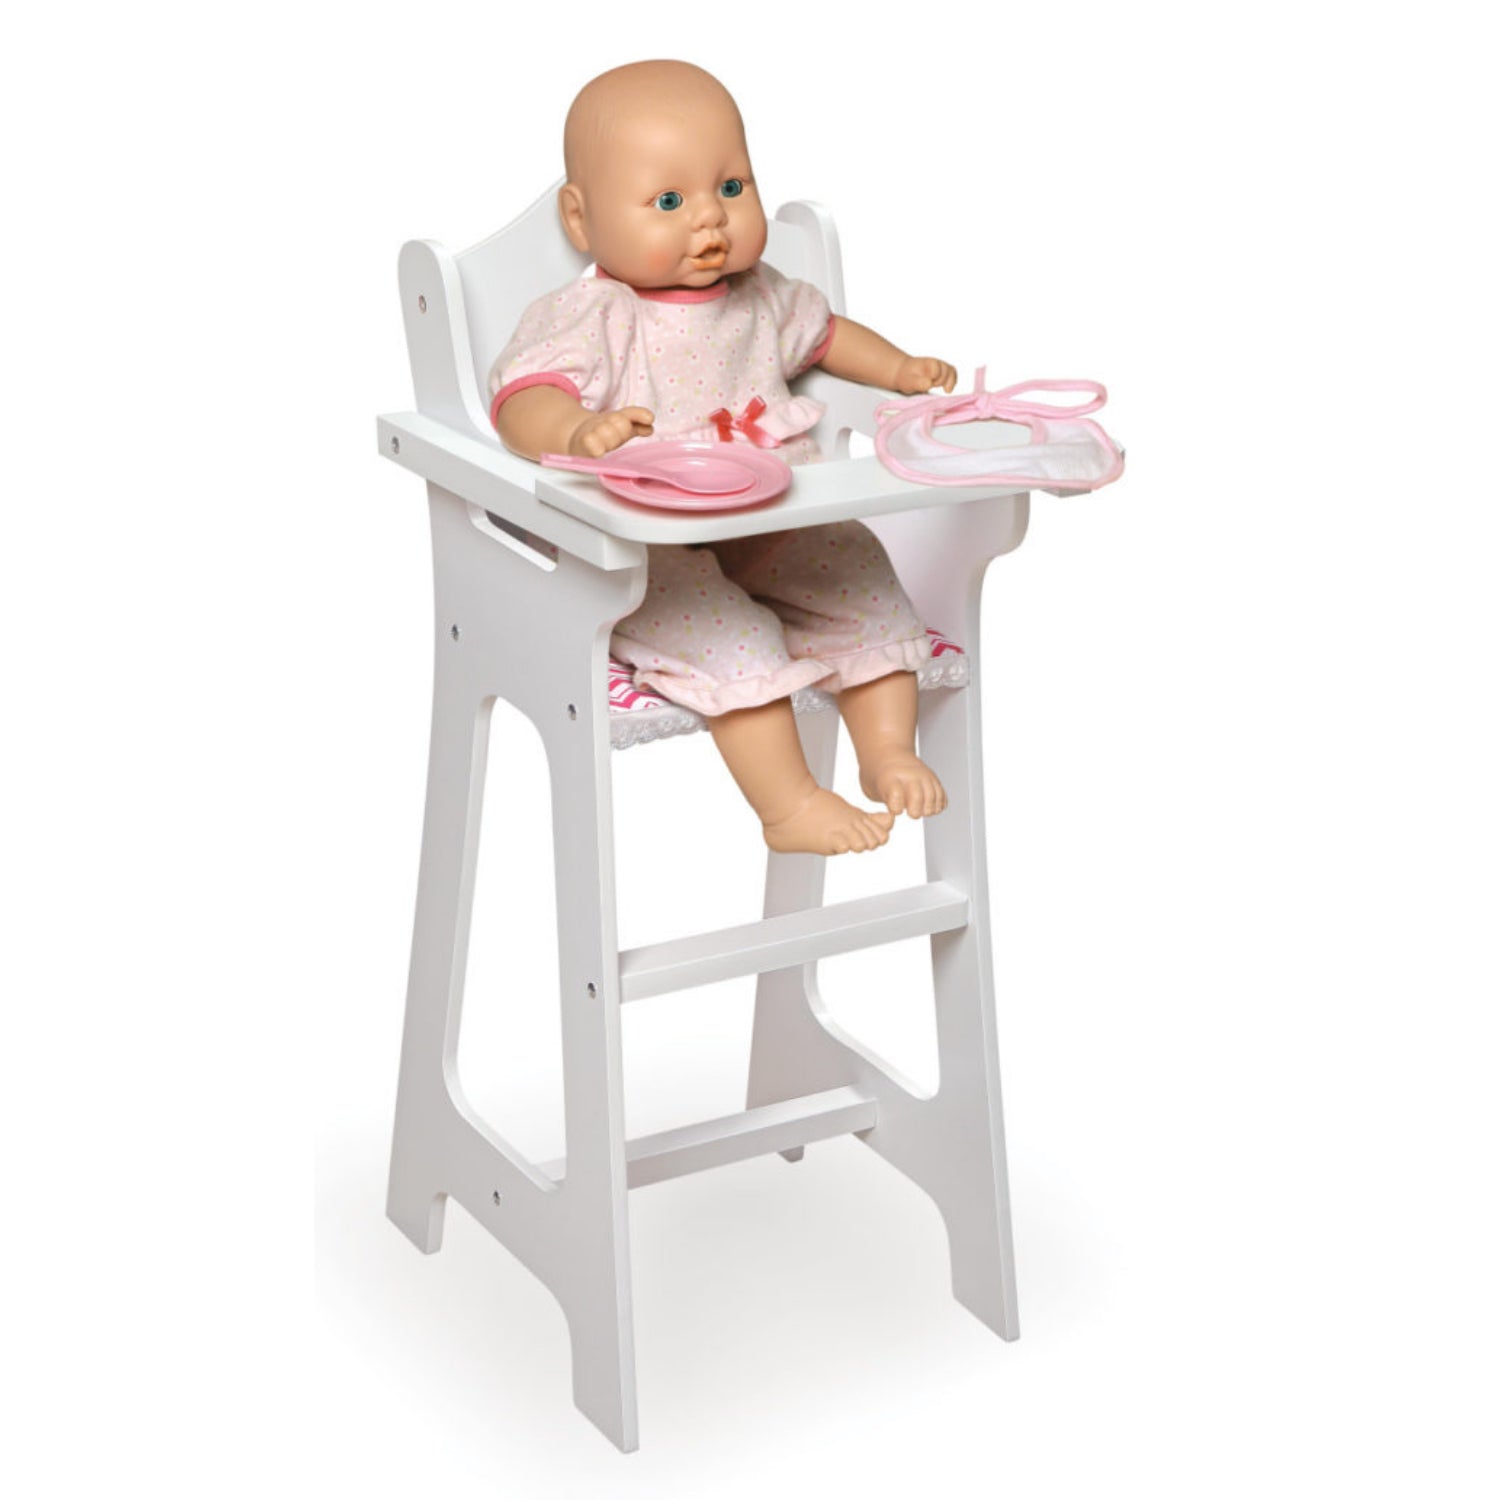 Badger Basket Doll High Chair with Accessories and Free Personalization Kit – White/Pink/Chevron